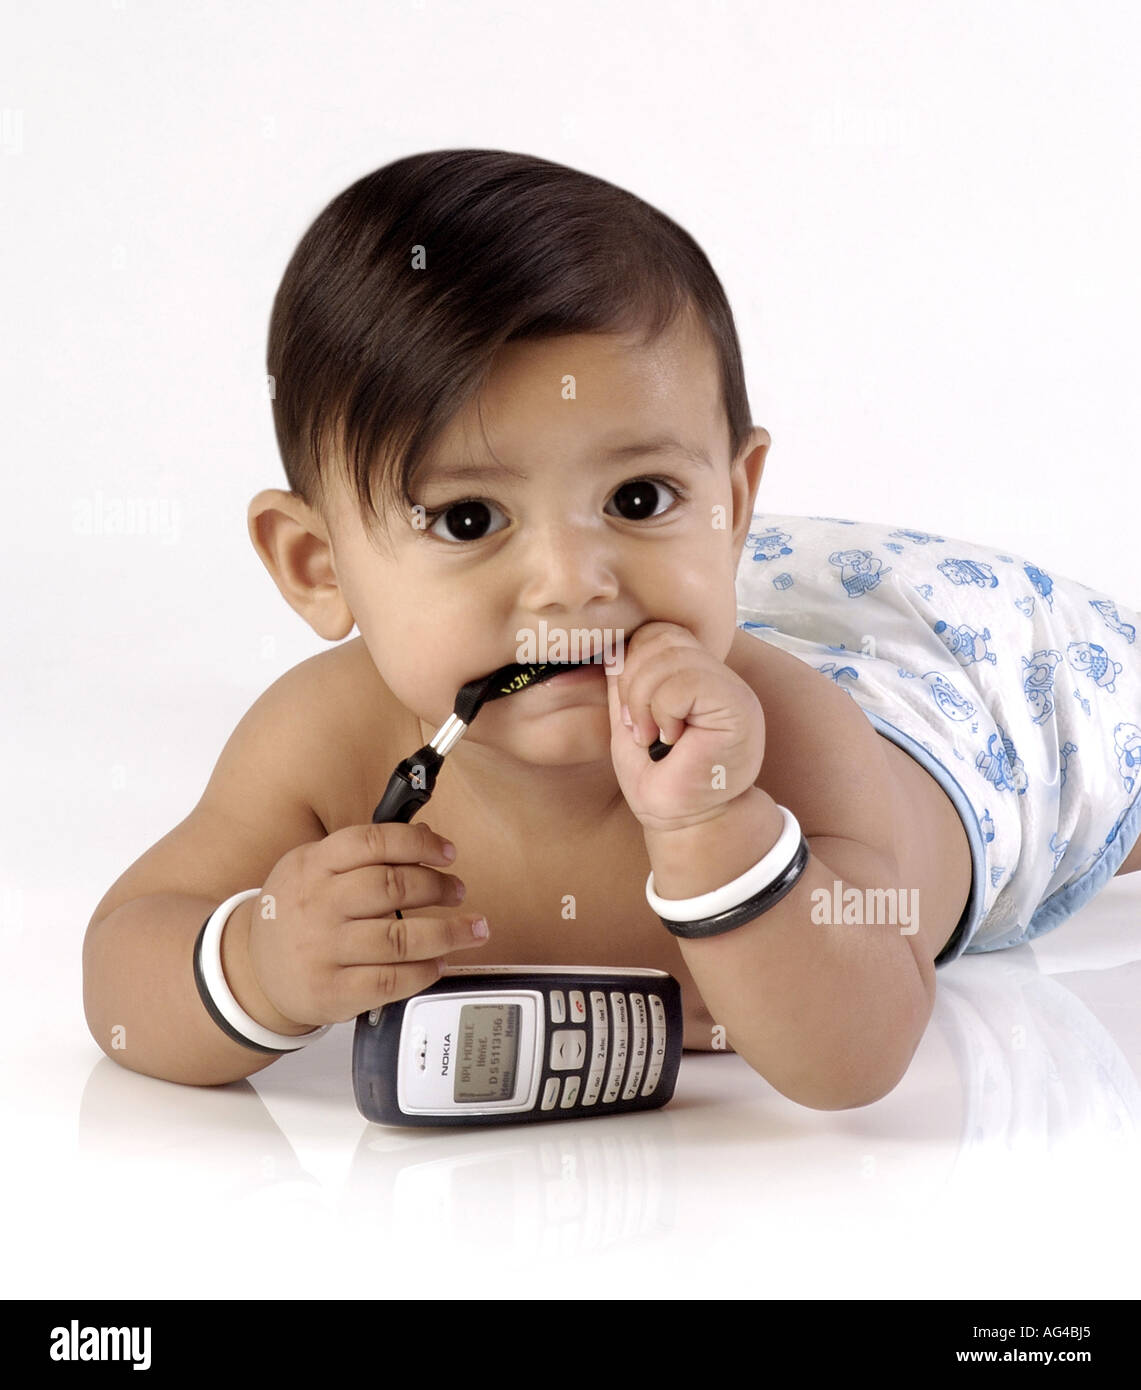 HMA79252 South Asian Indian small baby boy child in mood with mobile Model released Stock Photo